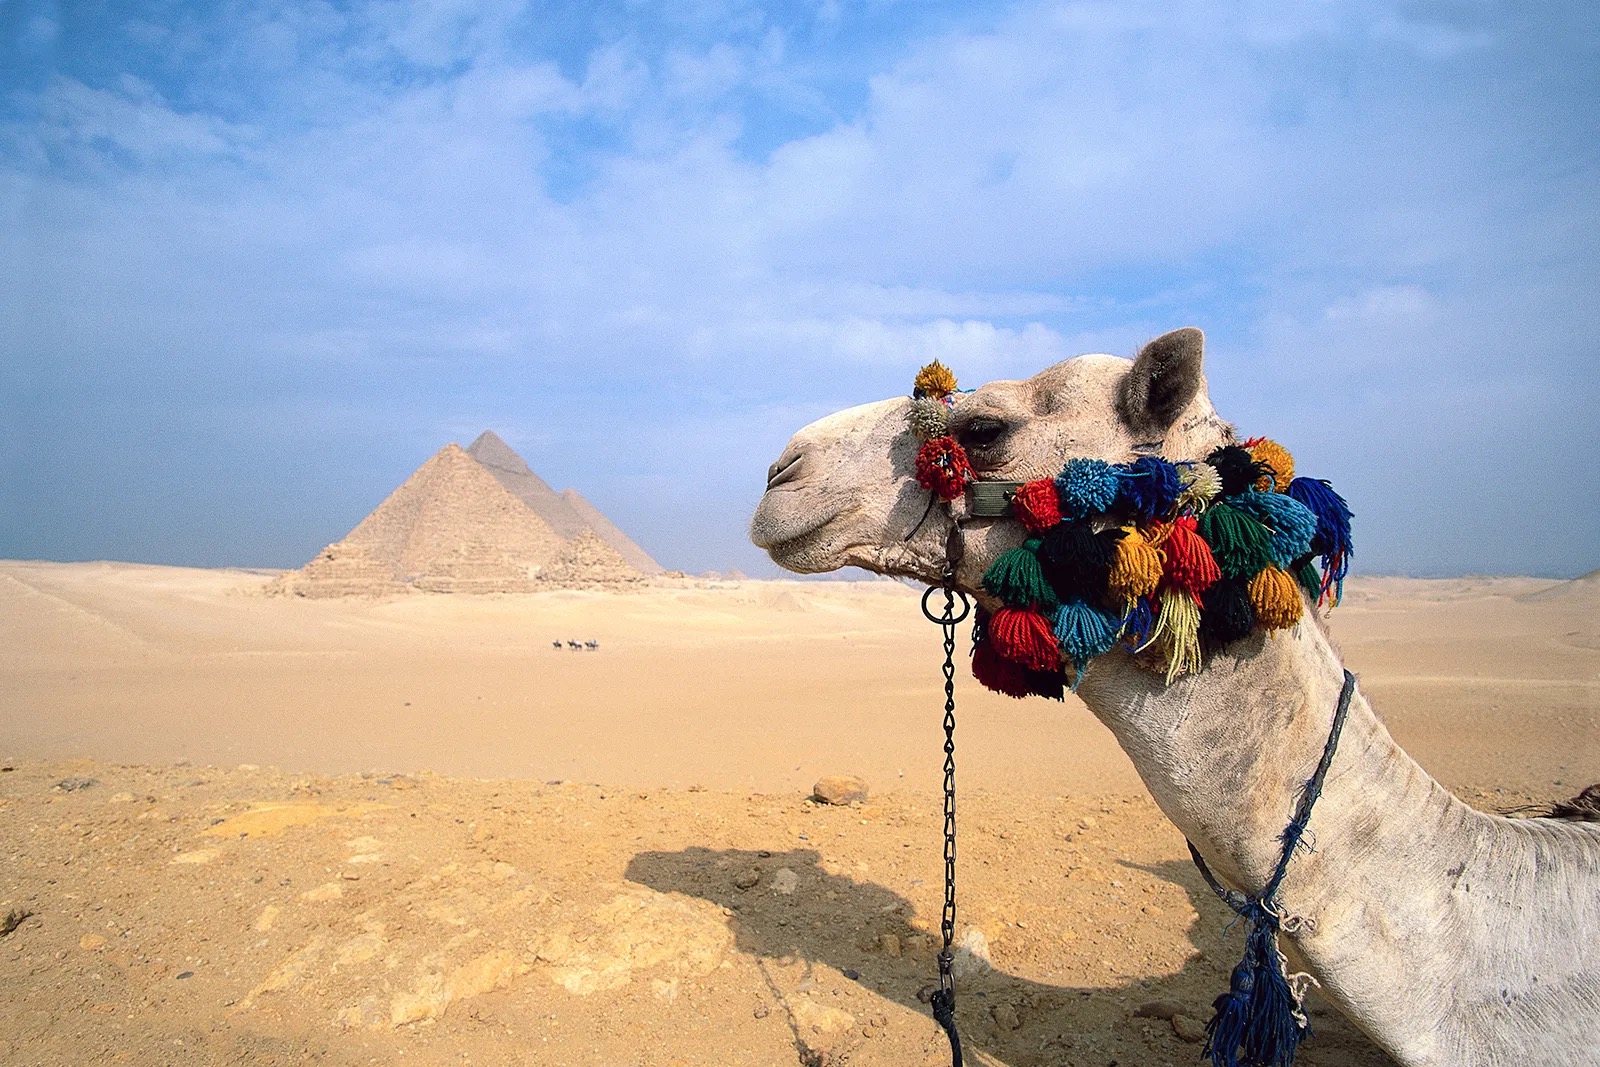 Even If You Don’t Know Much About Geography, Play This World Landmarks Quiz Anyway Camel Pyramids Of Giza Egypt